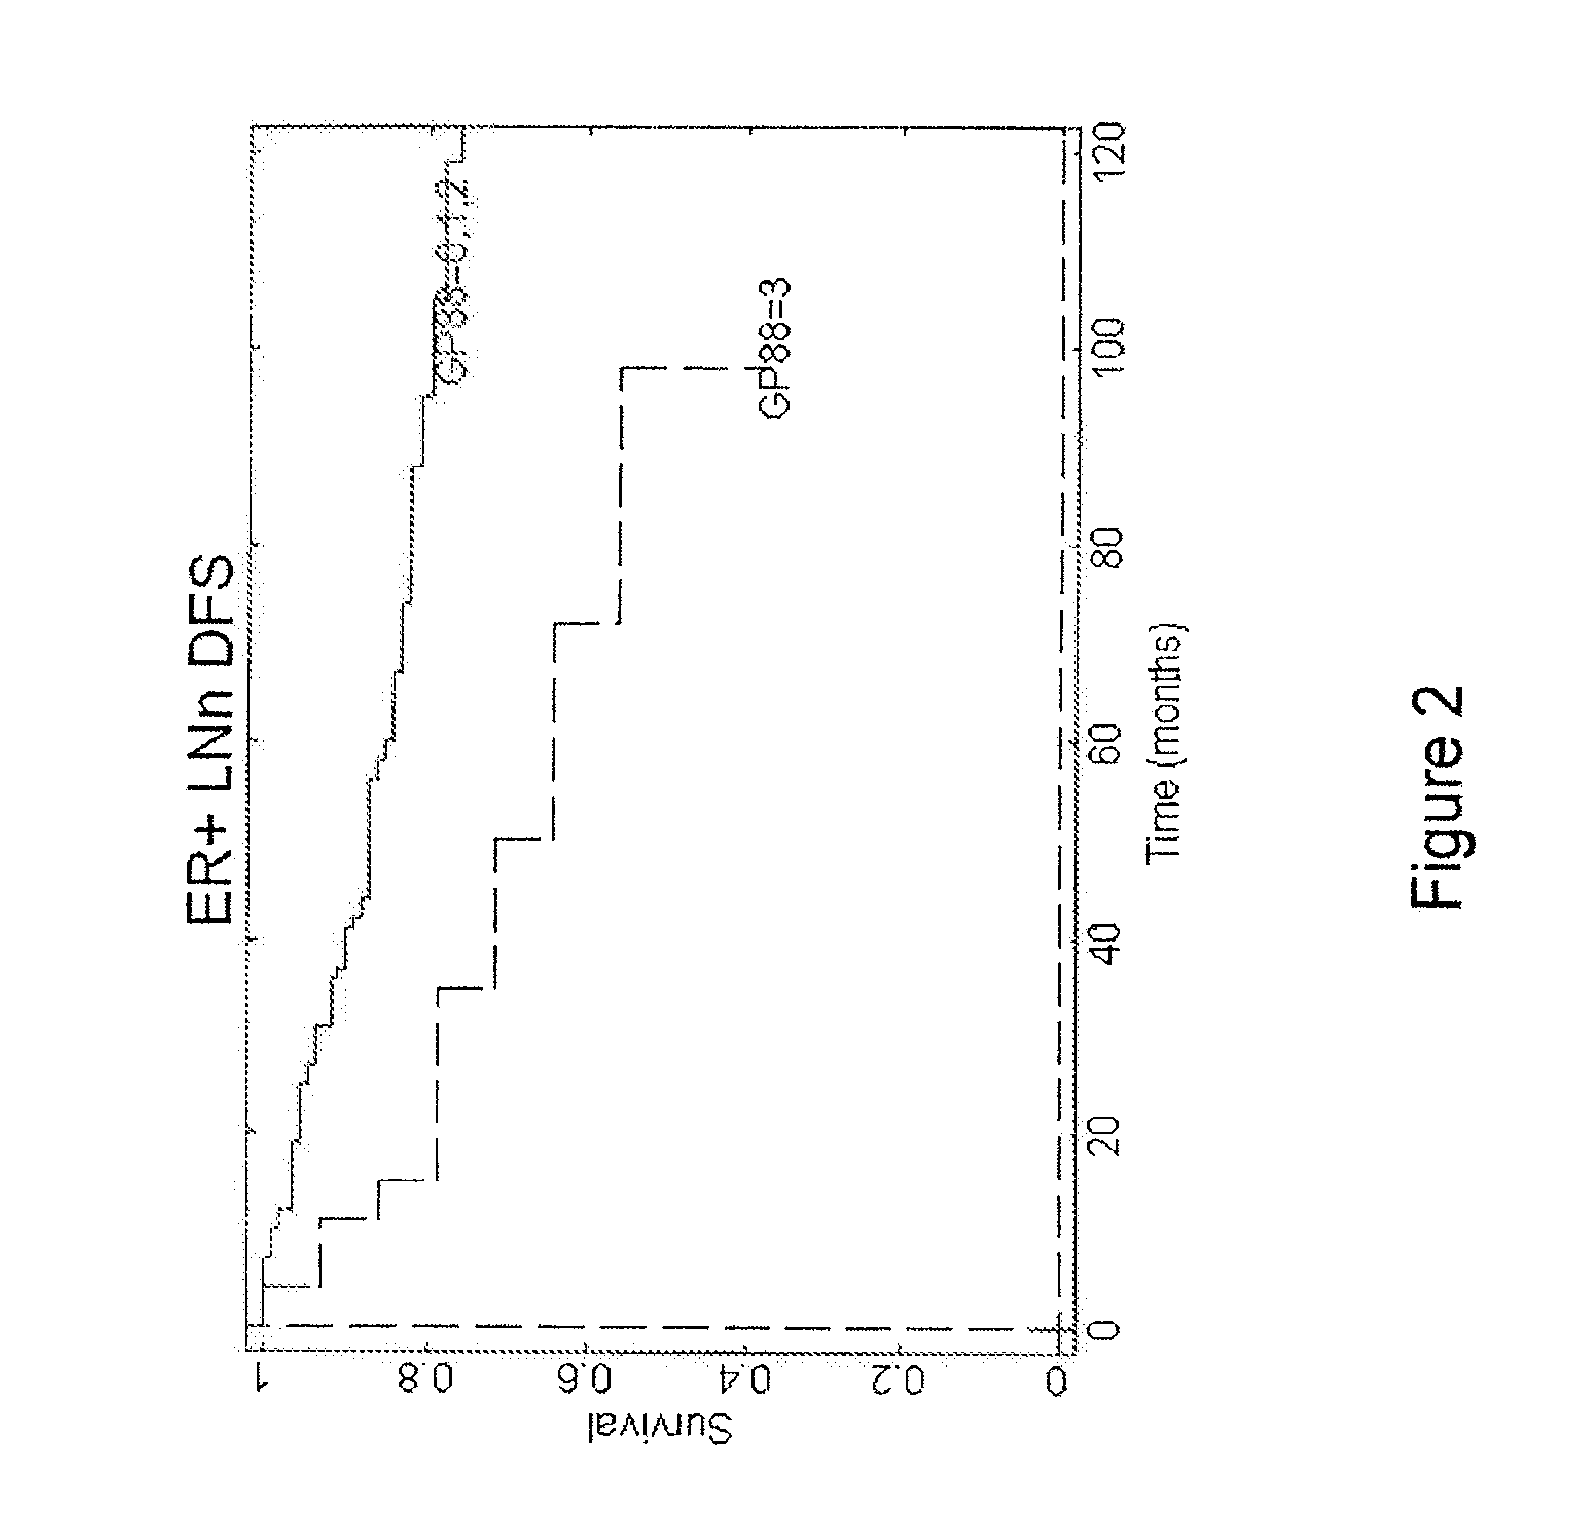 Methods for diagnosing cancer and determining the overall survival and disease-free survival of cancer patients